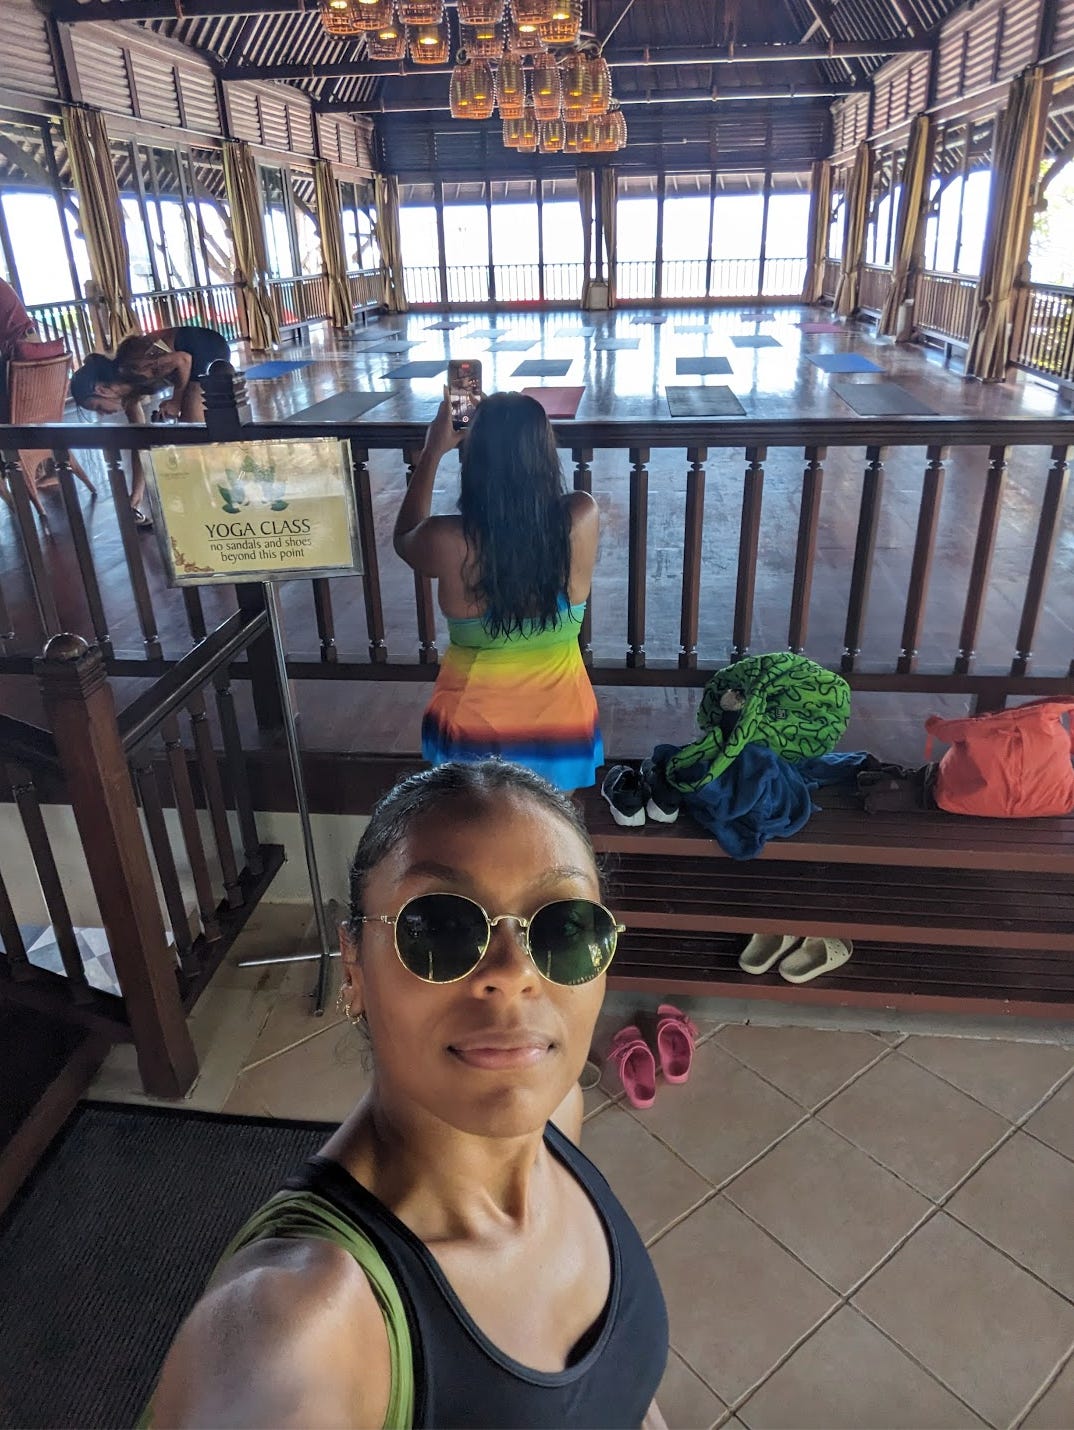 A selfie of Nathalie in front of a large yoga studio that has yoga mats lined up. There are large windows towards the front of the studio that overlooks the beach